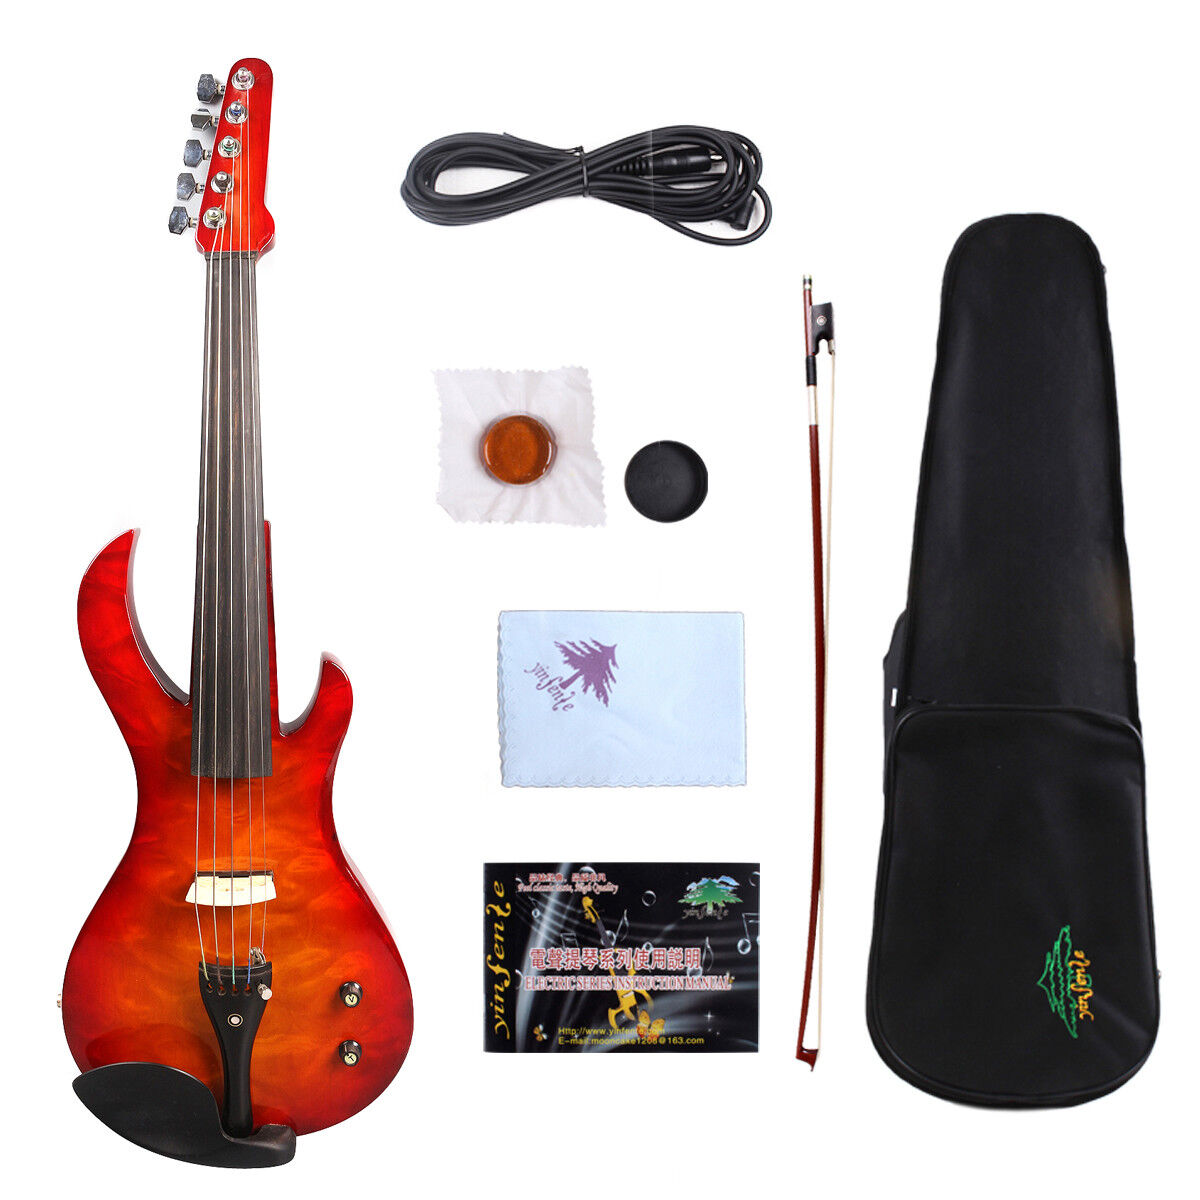 Yinfente 5String 16inch Electric Silent Viola Handmade Free Case